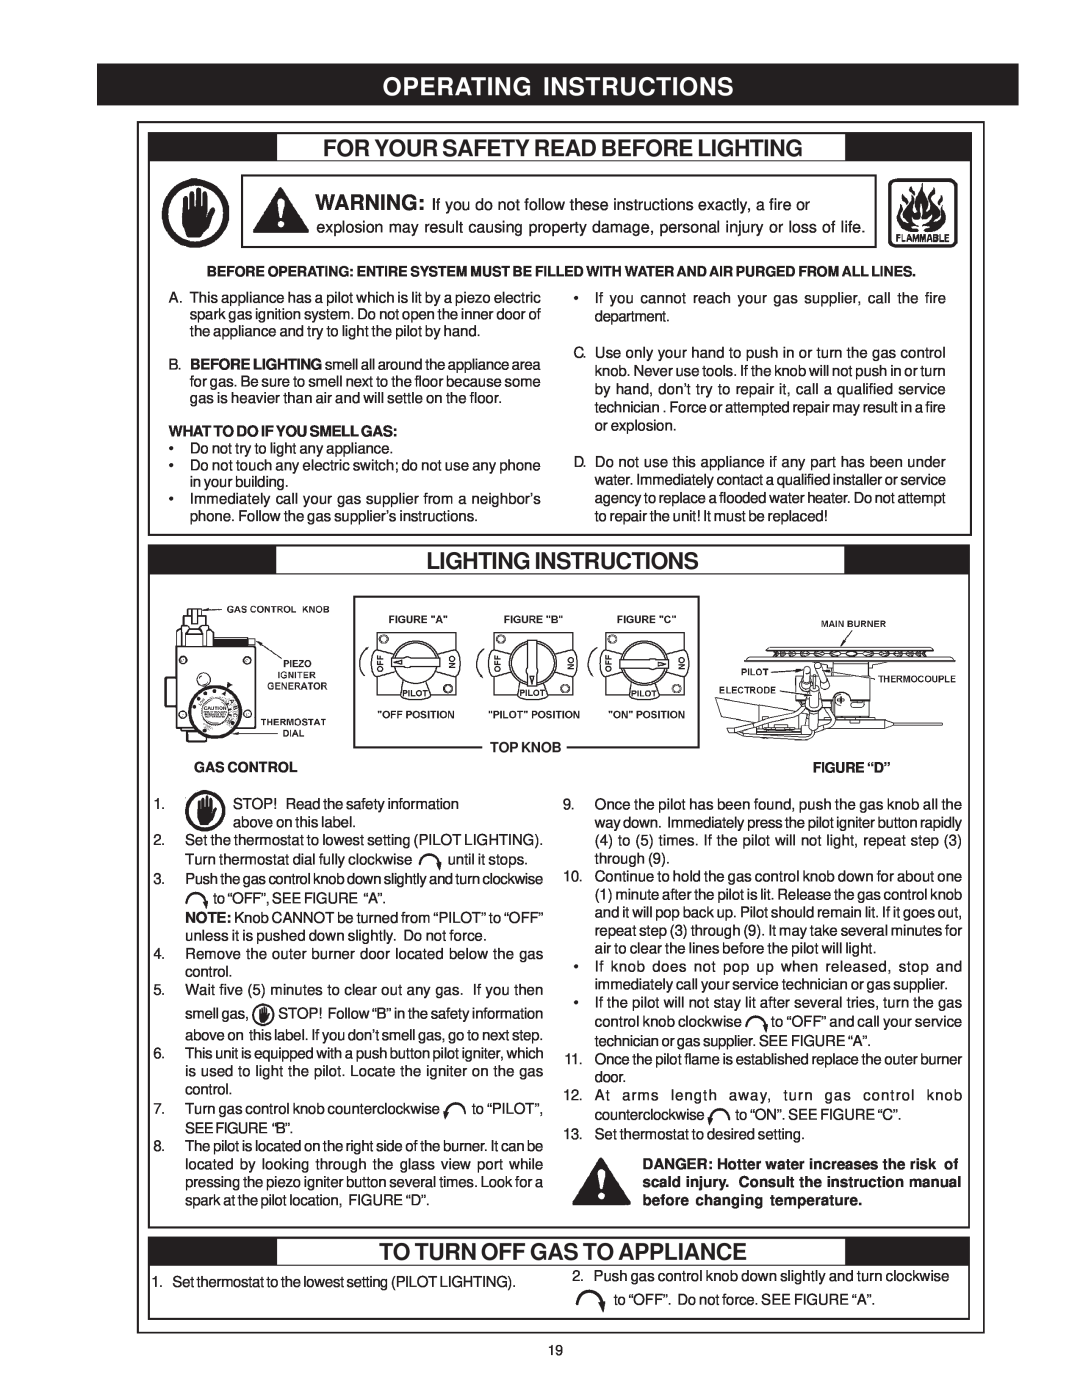 Maytag C3 Operating Instructions, For Your Safety Read Before Lighting, Lighting Instructions, What To Do If You Smell Gas 